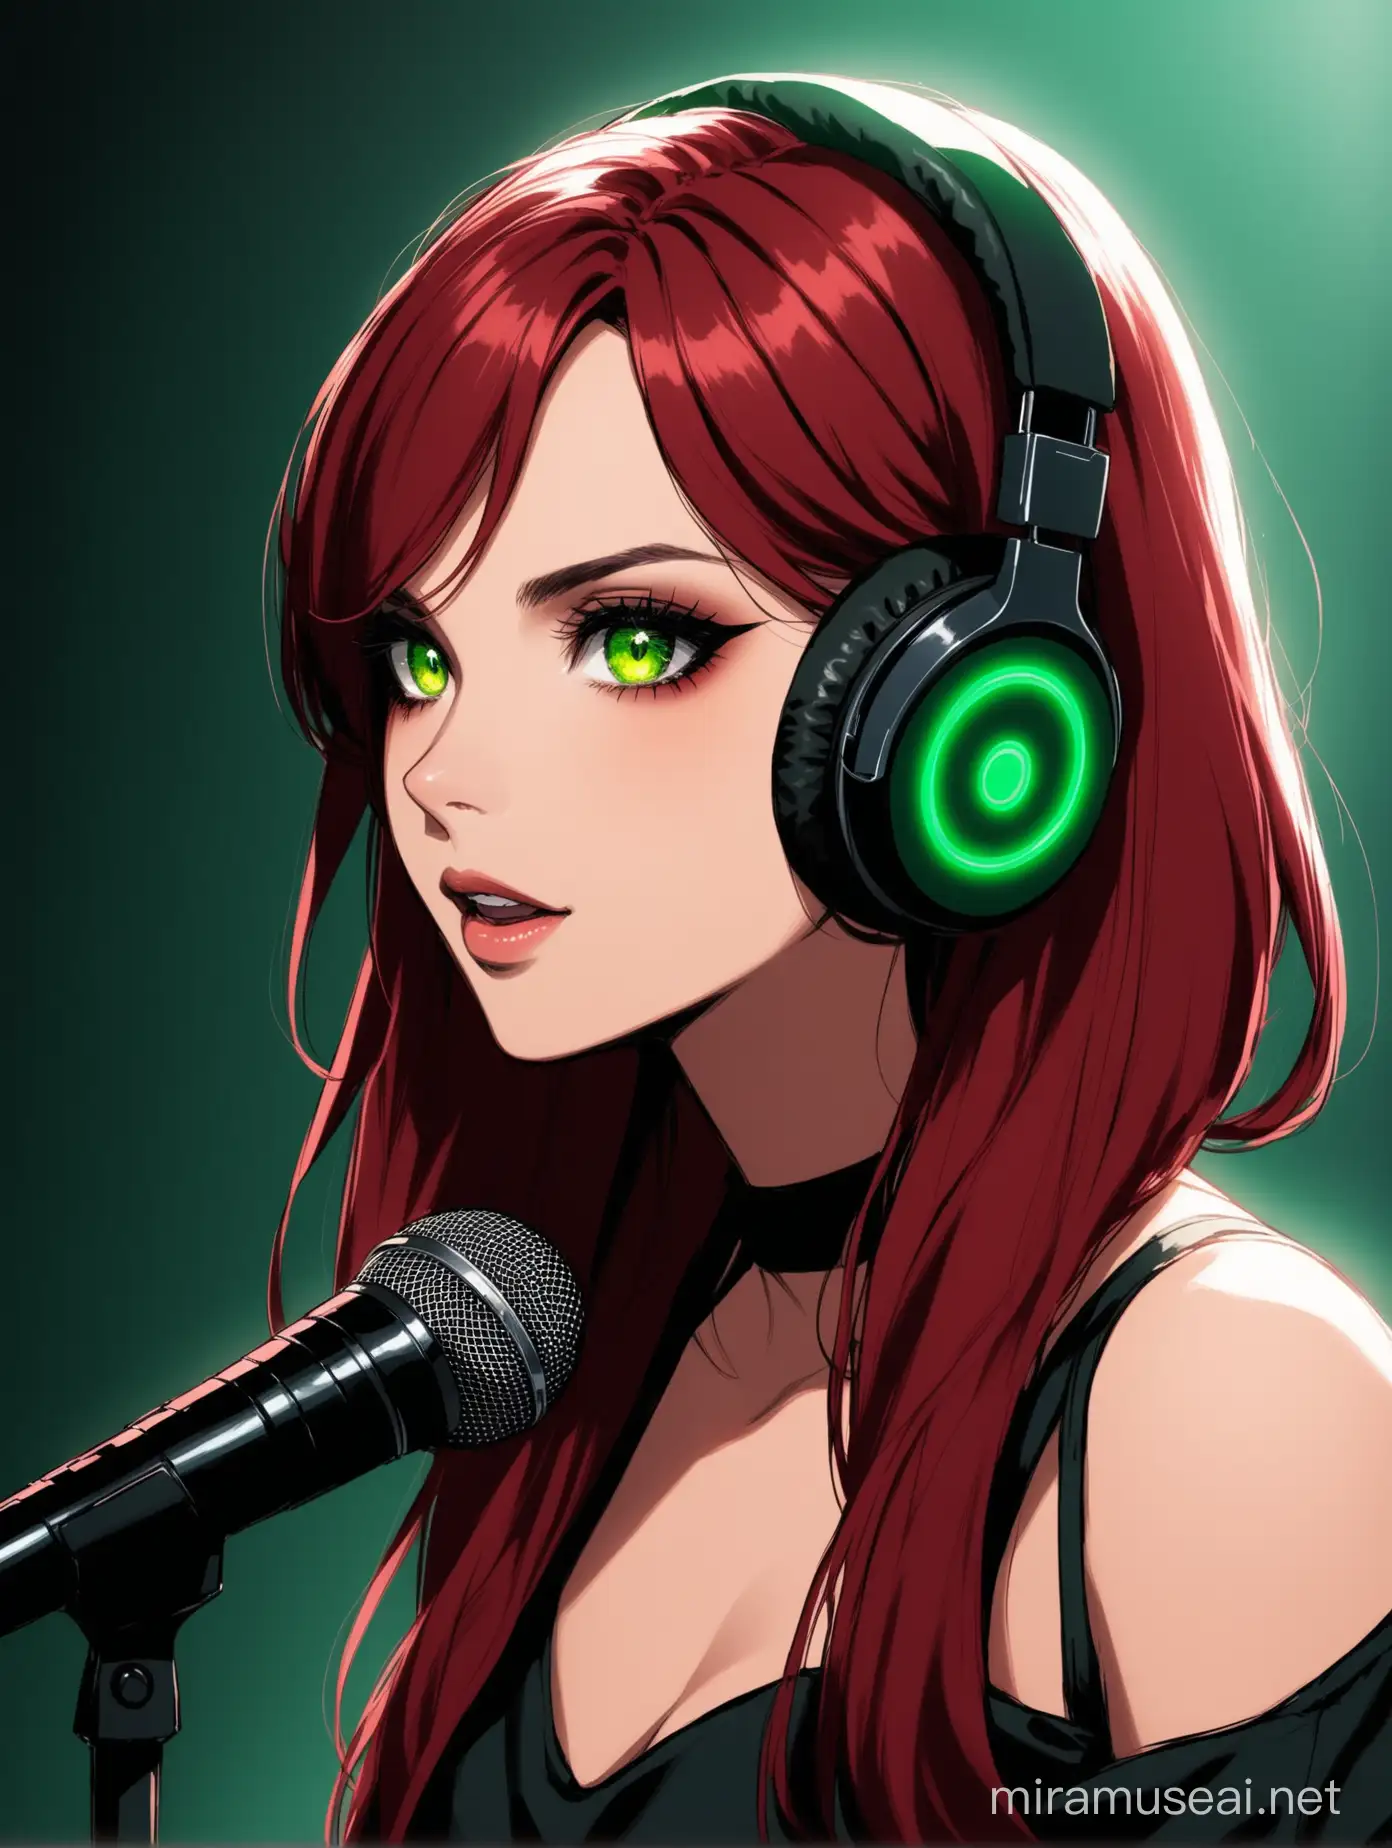 Podcaster with Dark Red Hair and GreenBrown Eyes Speaking into Microphone with Headphones On